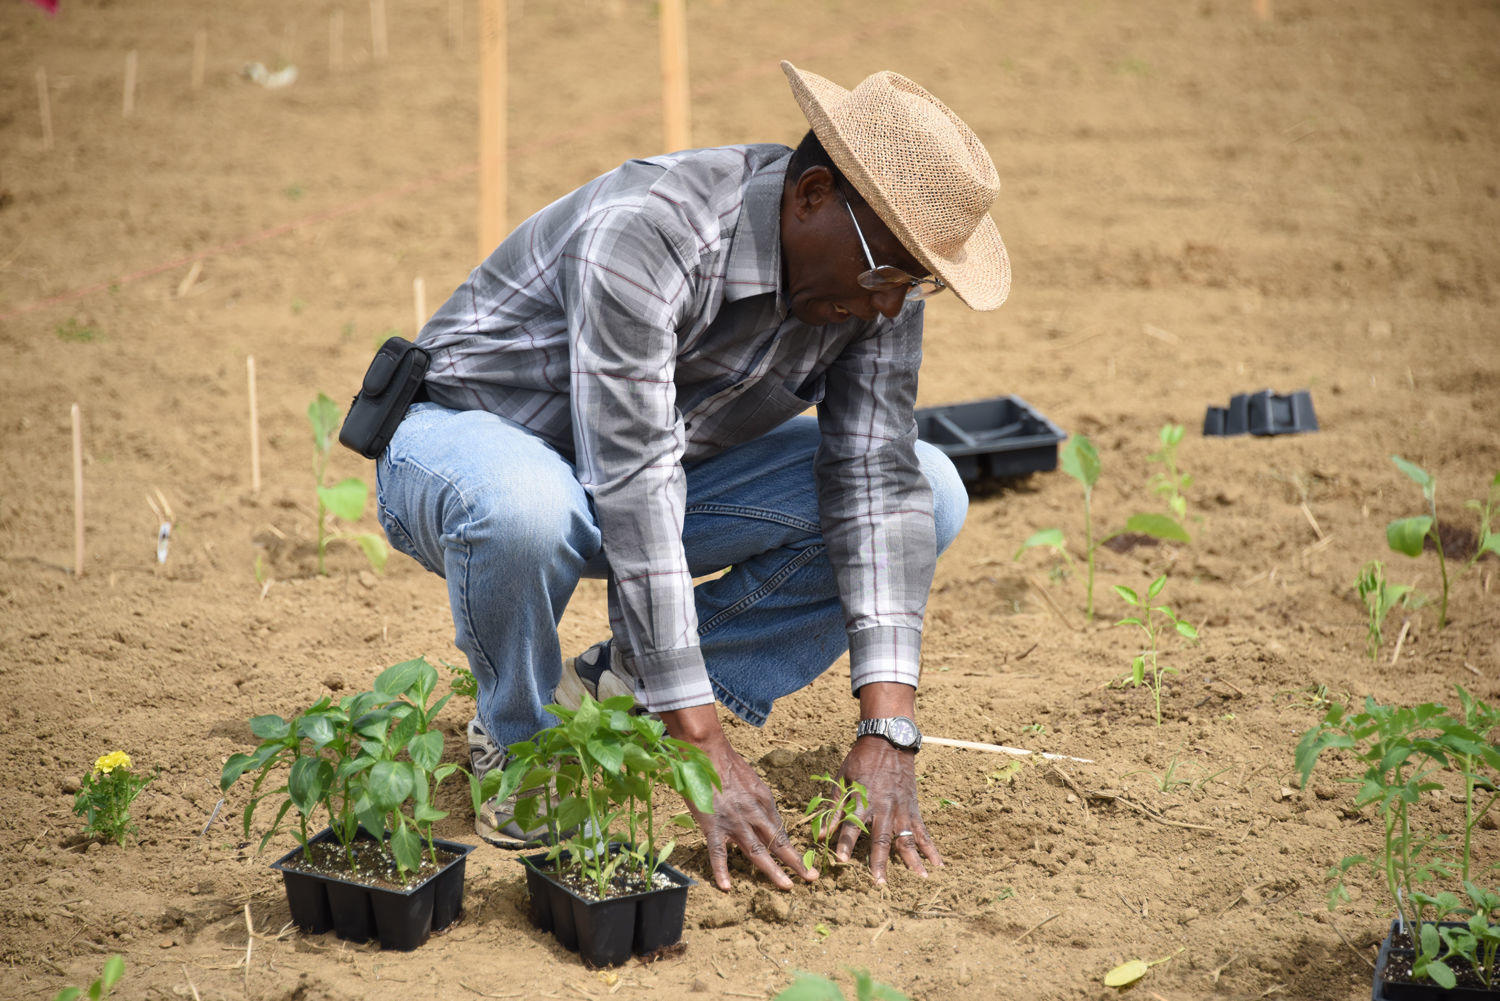 Dr. James E. Brown, professor and interim program leader of Fort Valley State University’s Agriculture and Natural Resources program, plants peppers at the school’s community garden located on campus.